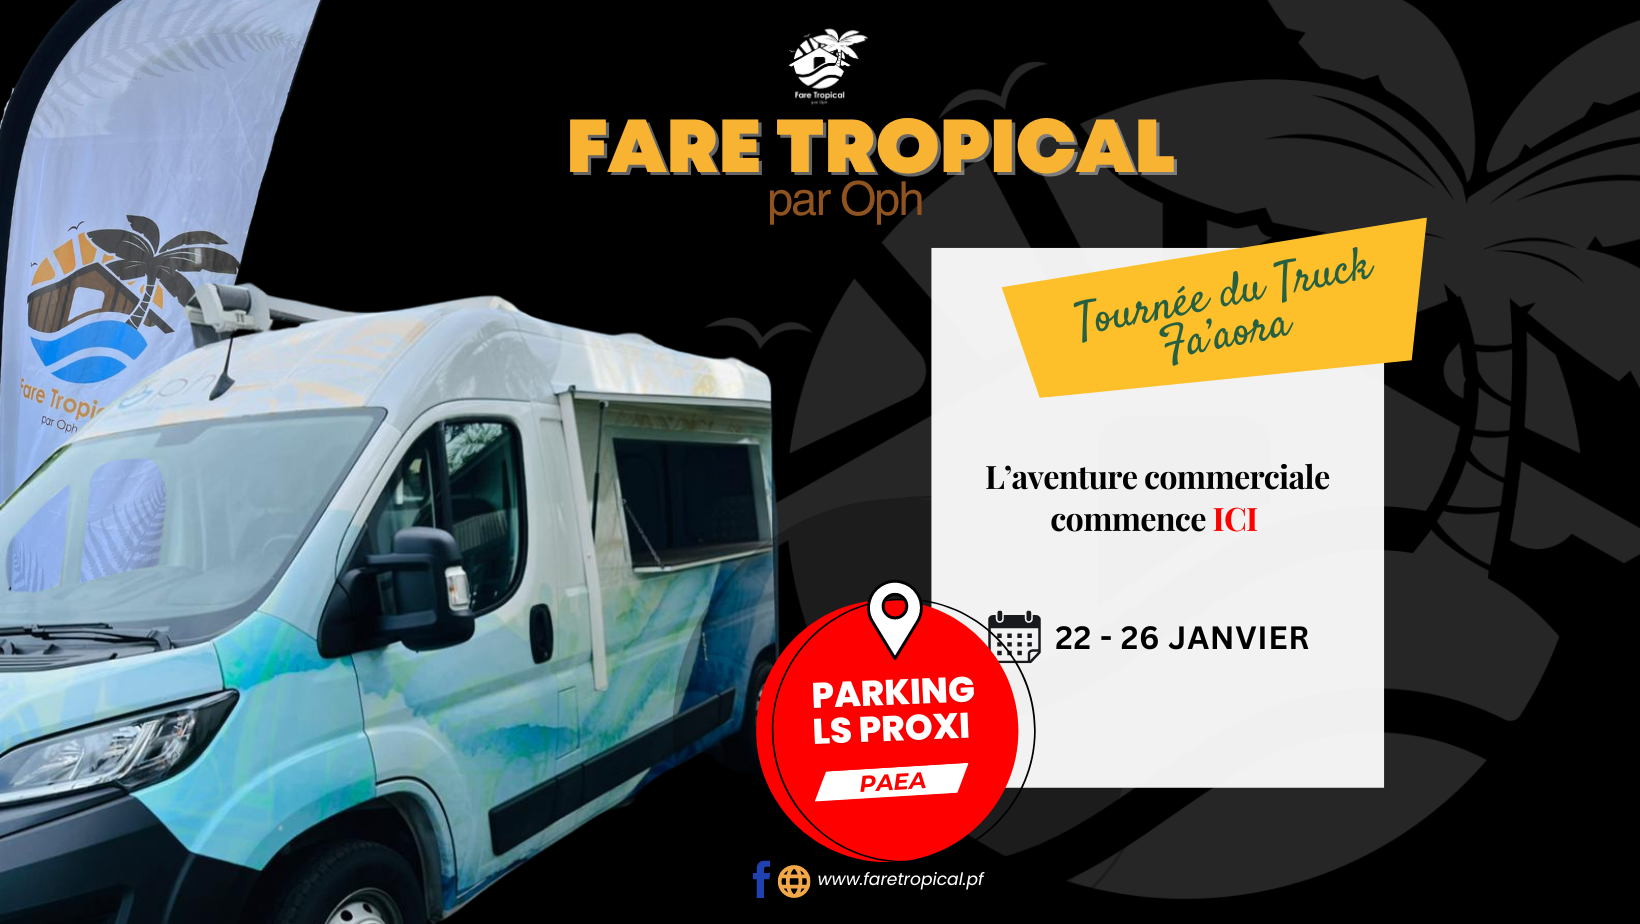 Truck Faaora – L’aventure commerciale commence !